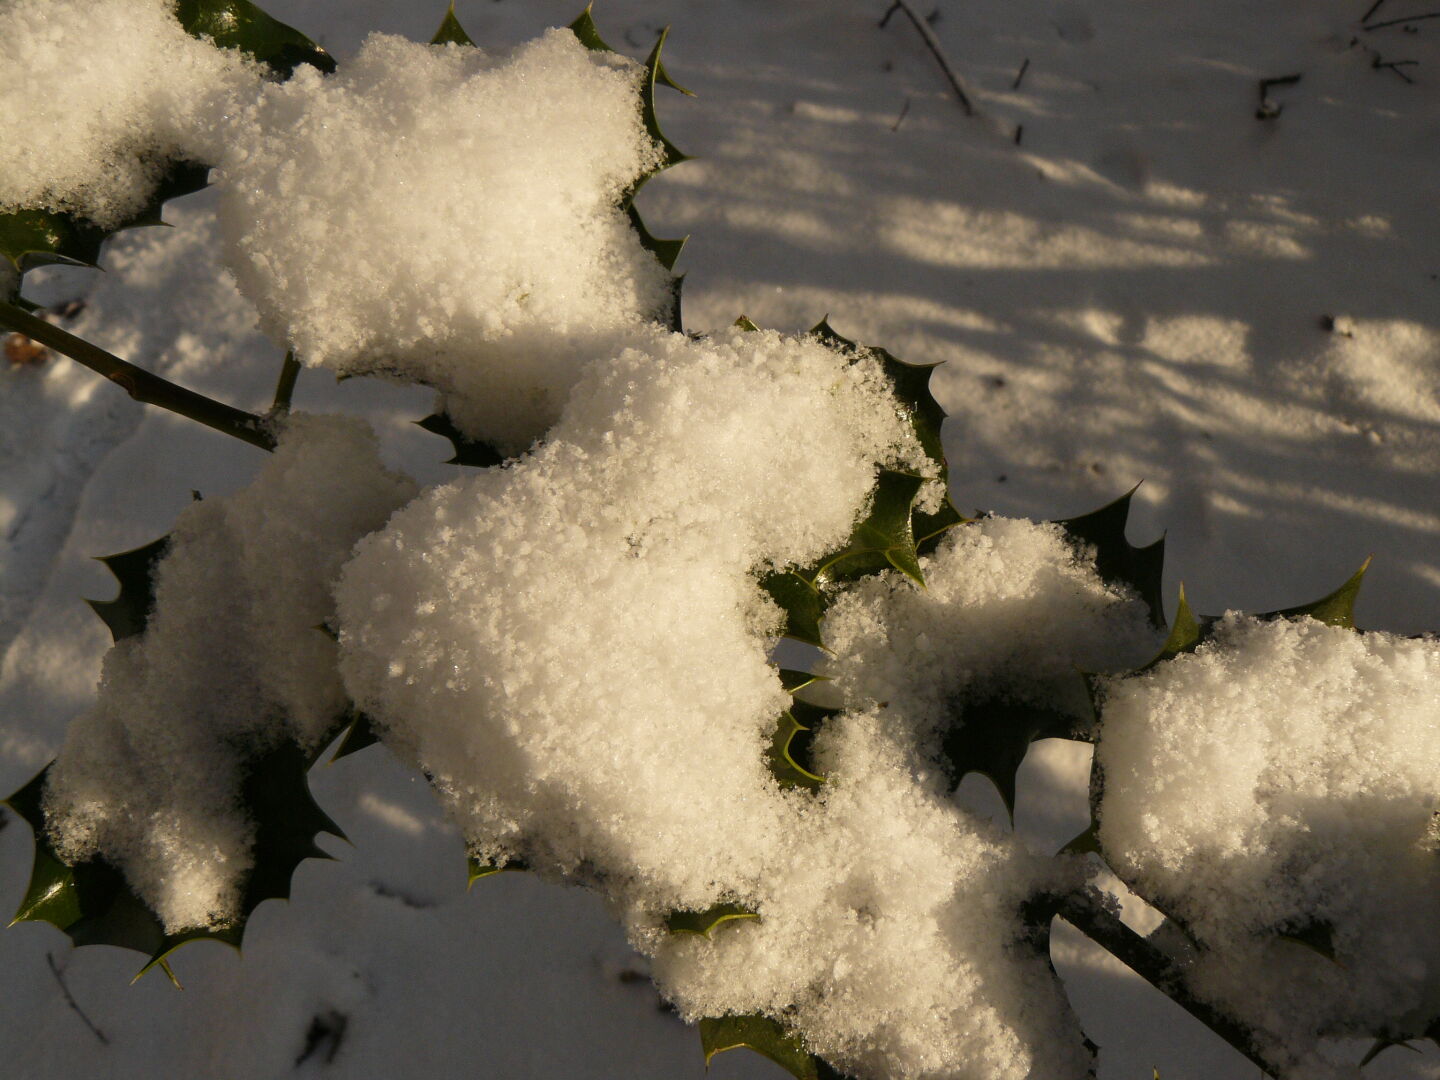 Snow on the leaves of an ilex.